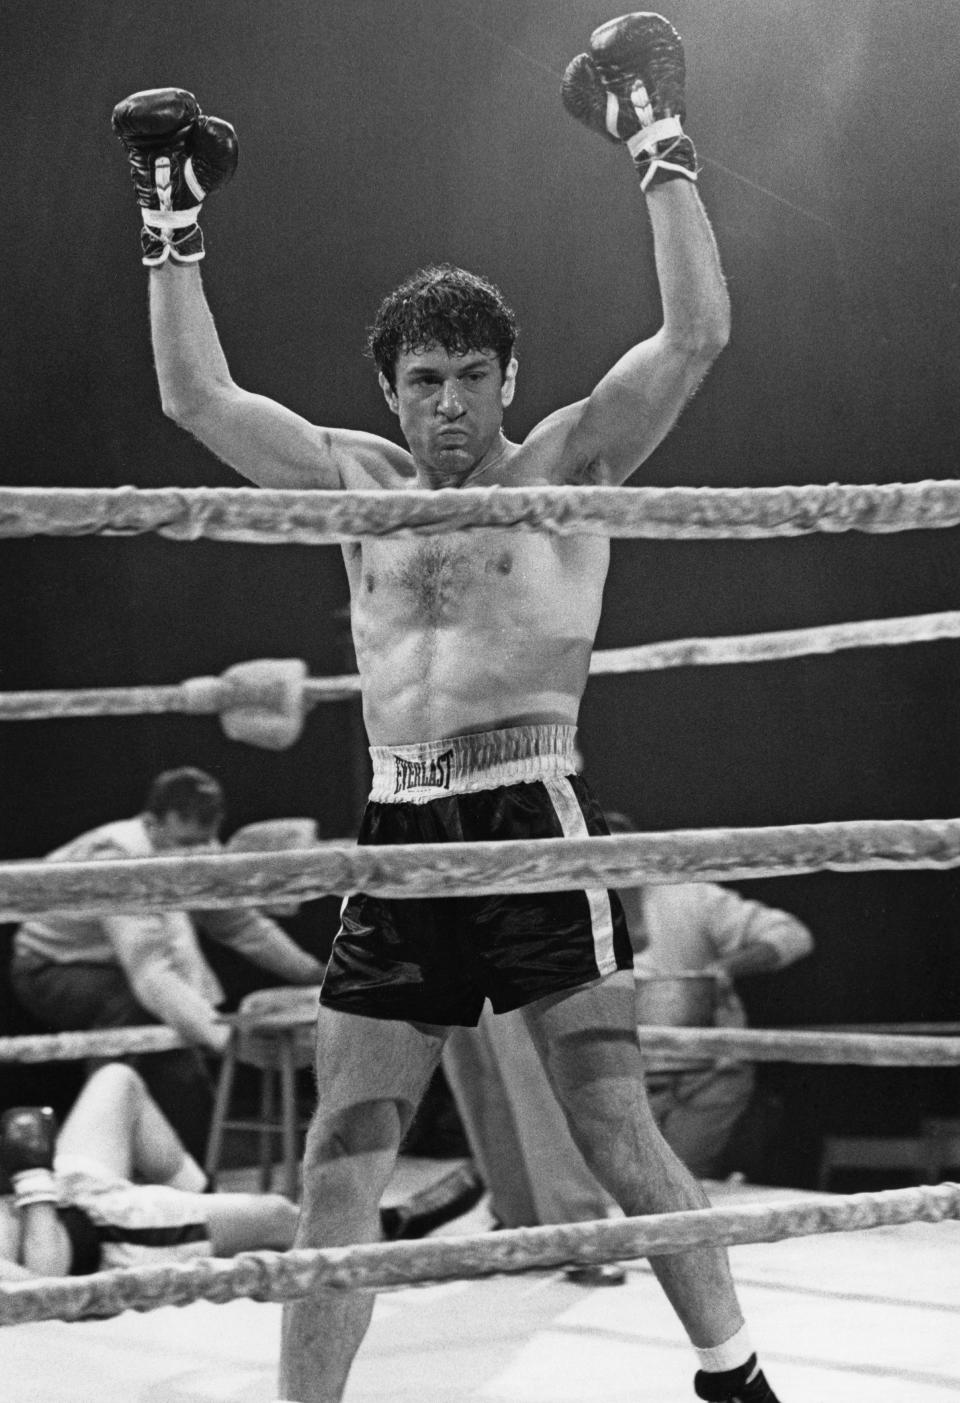 Robert De Niro in a boxing ring with his hands raised